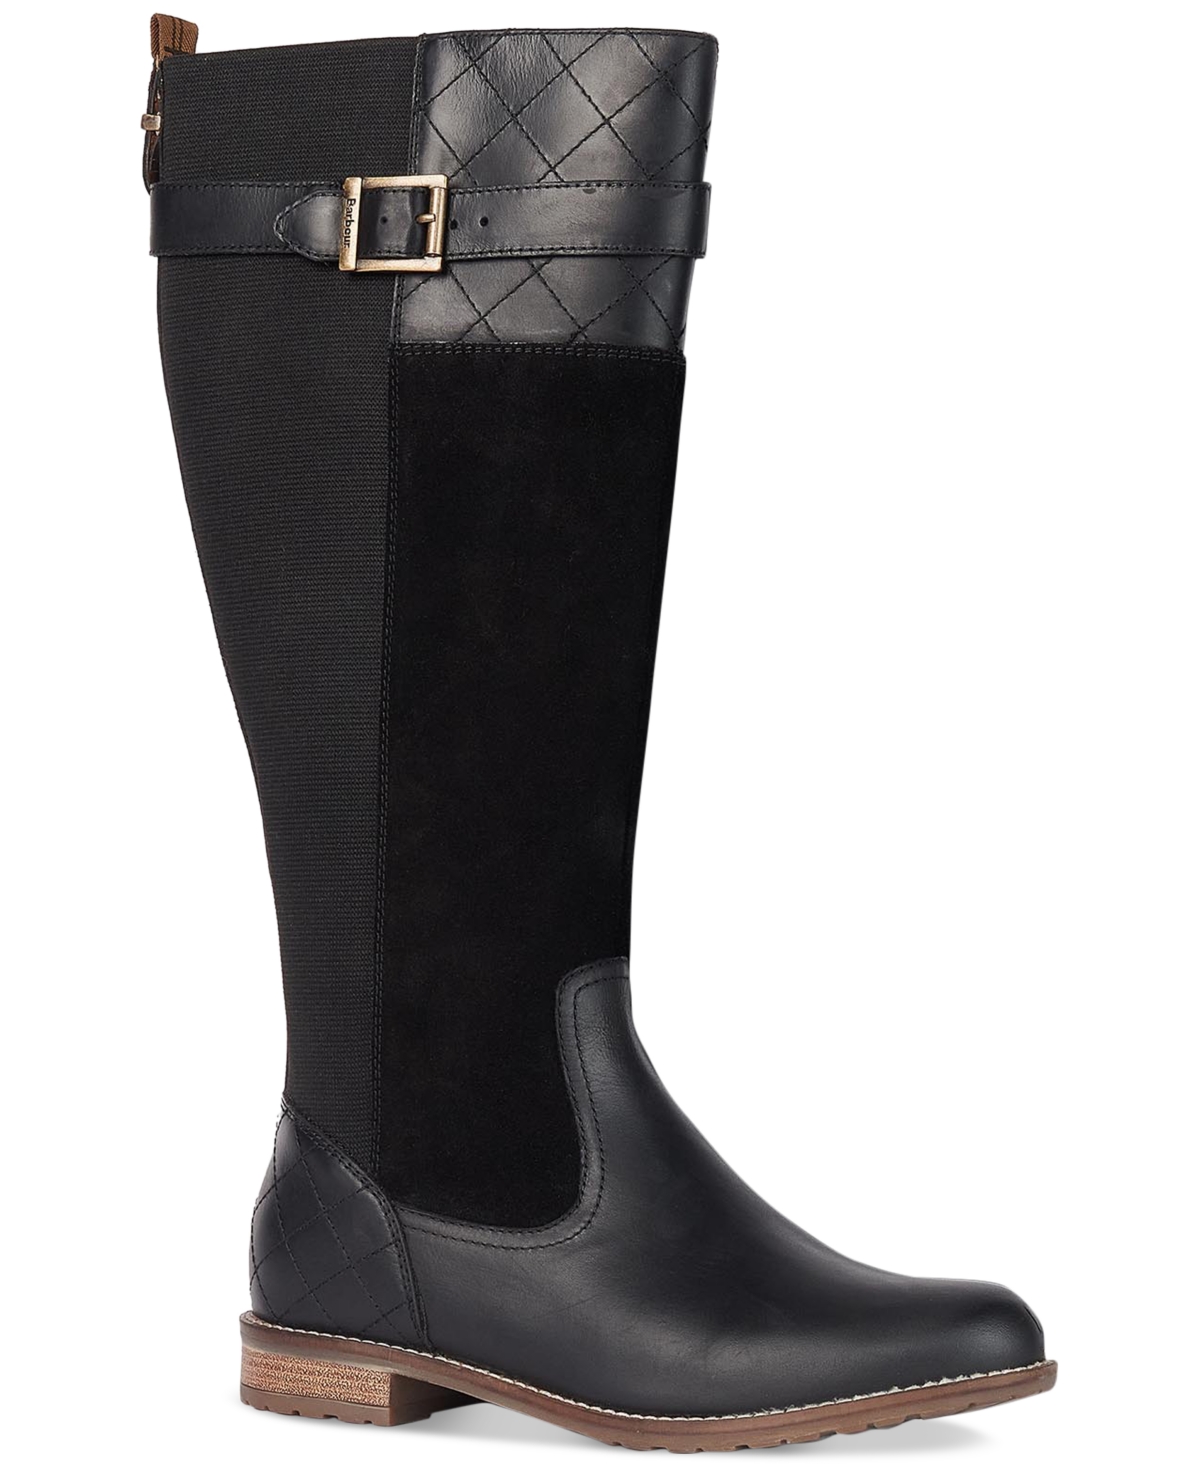 Women's Ange Mixed-Media Buckled-Strap Boots - Black